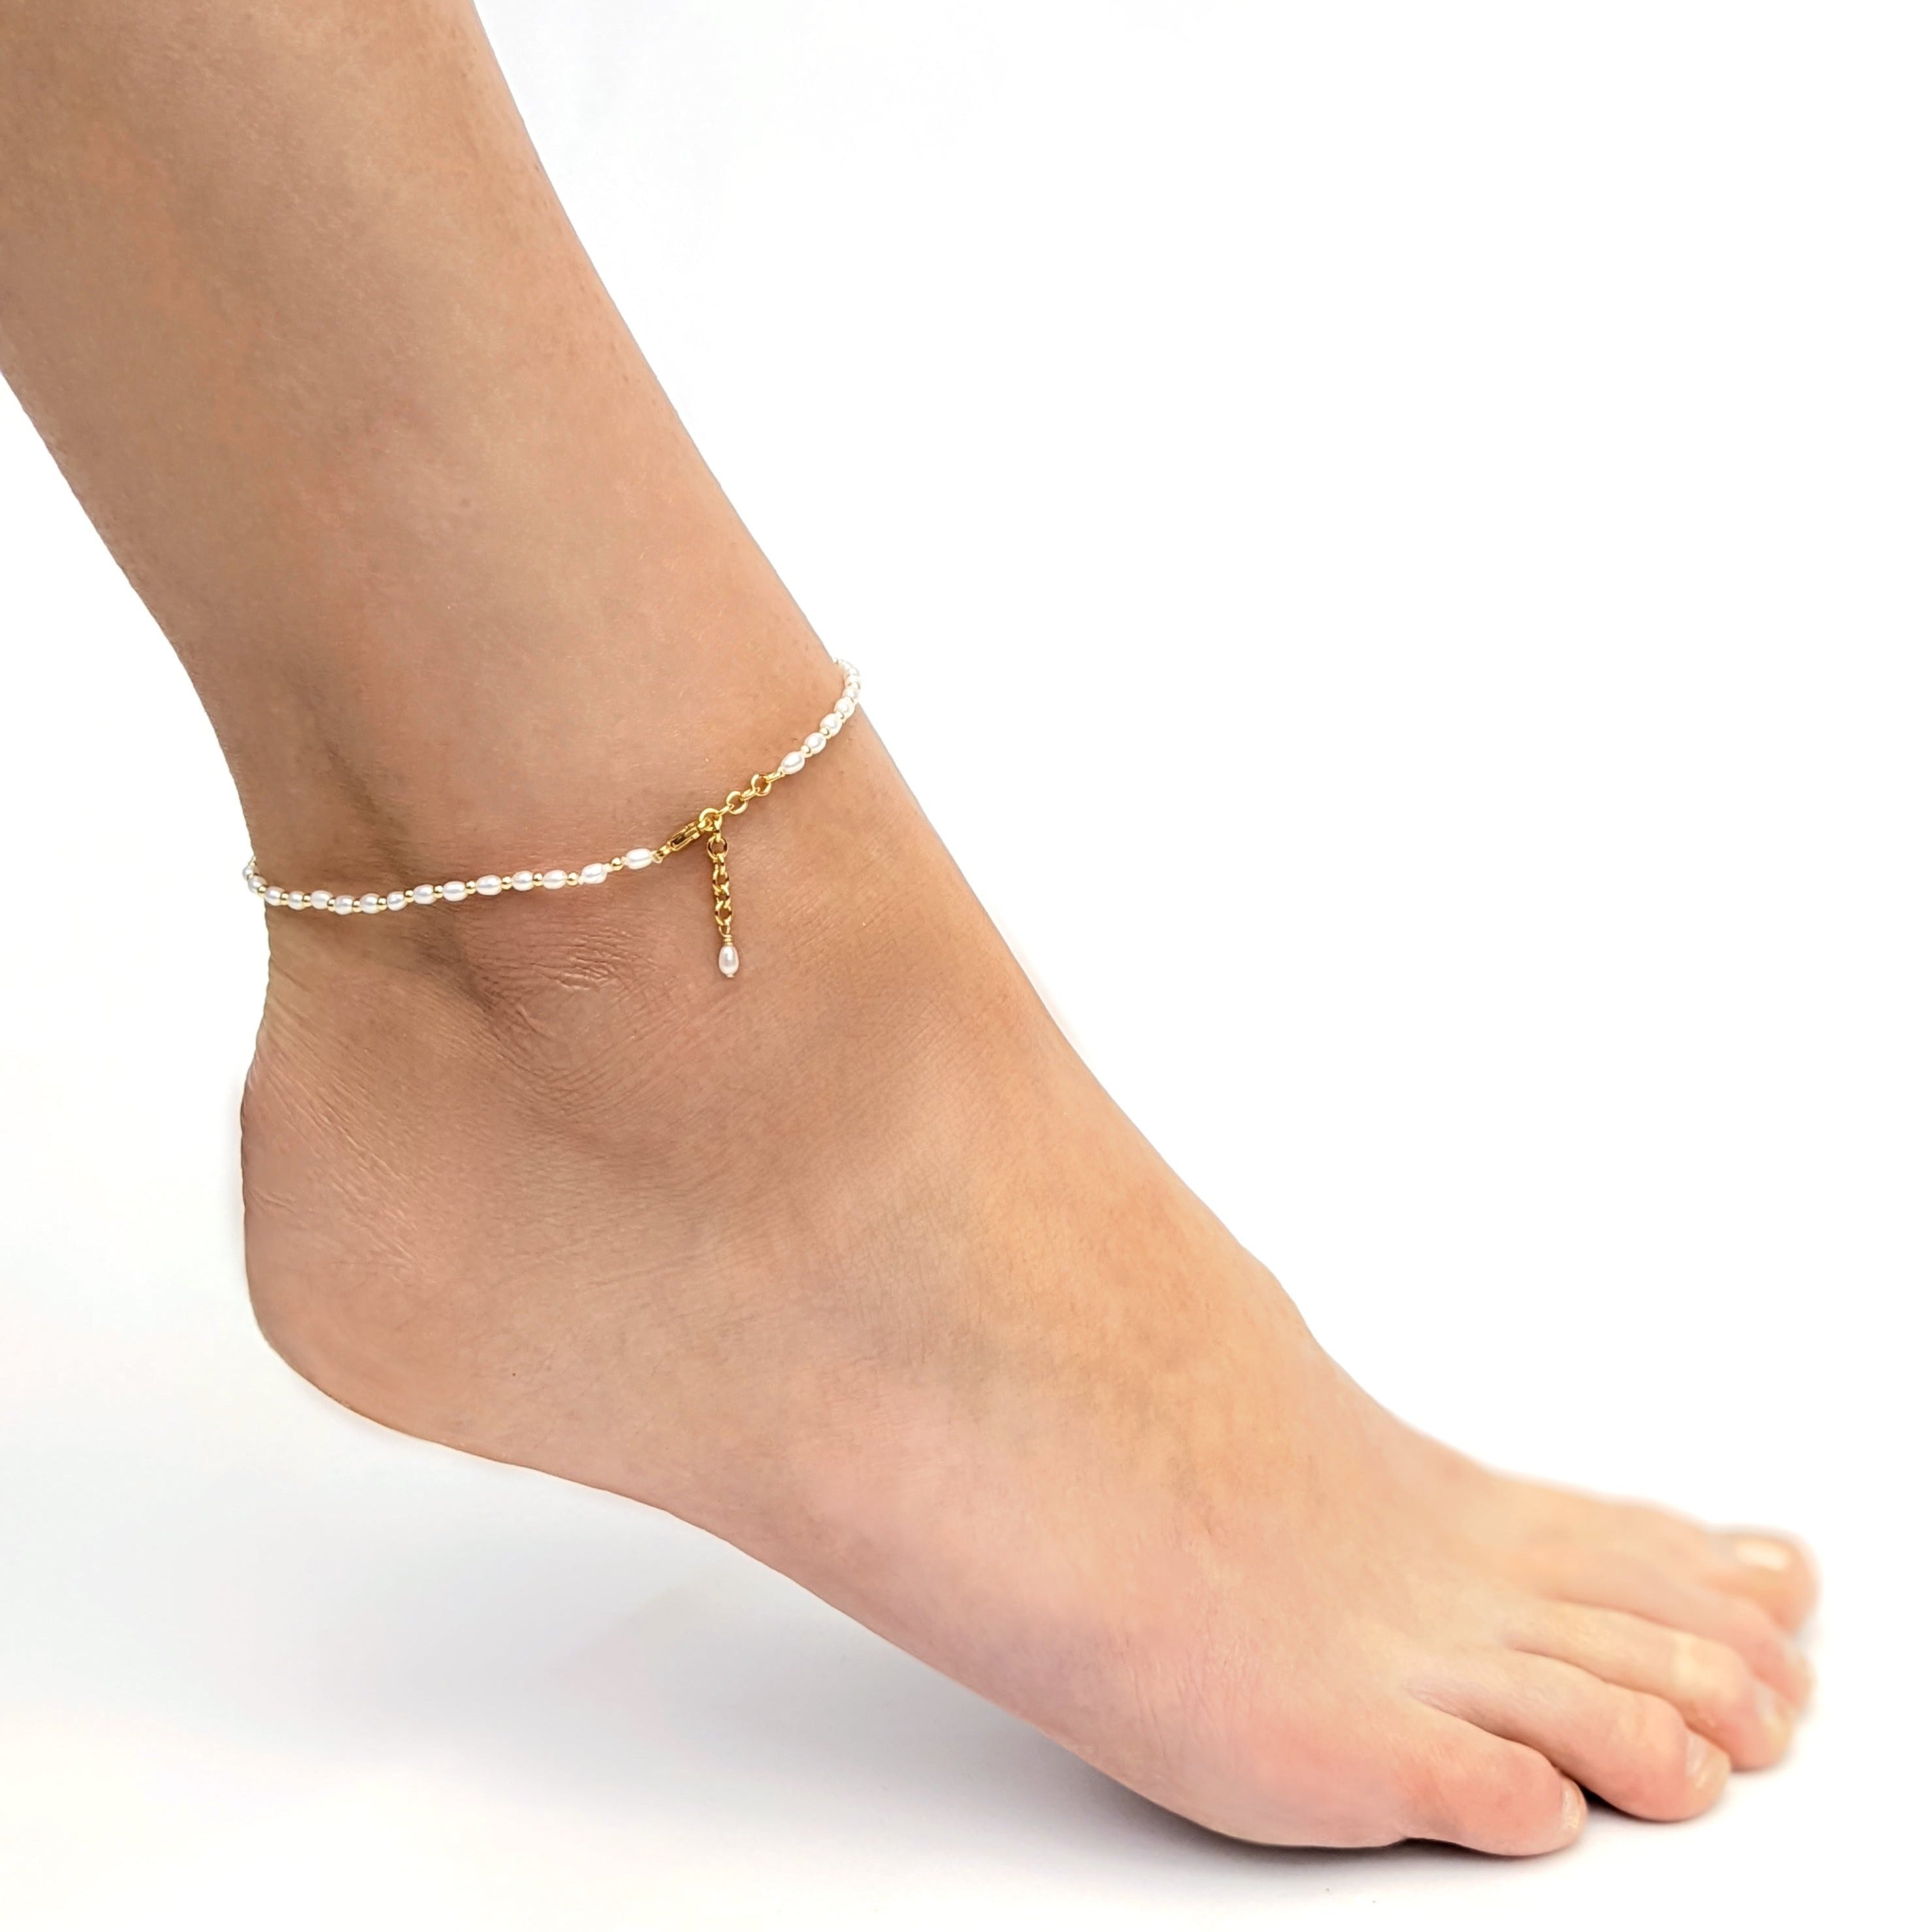 Adjustable small pearl and gold bead ankle bracelet